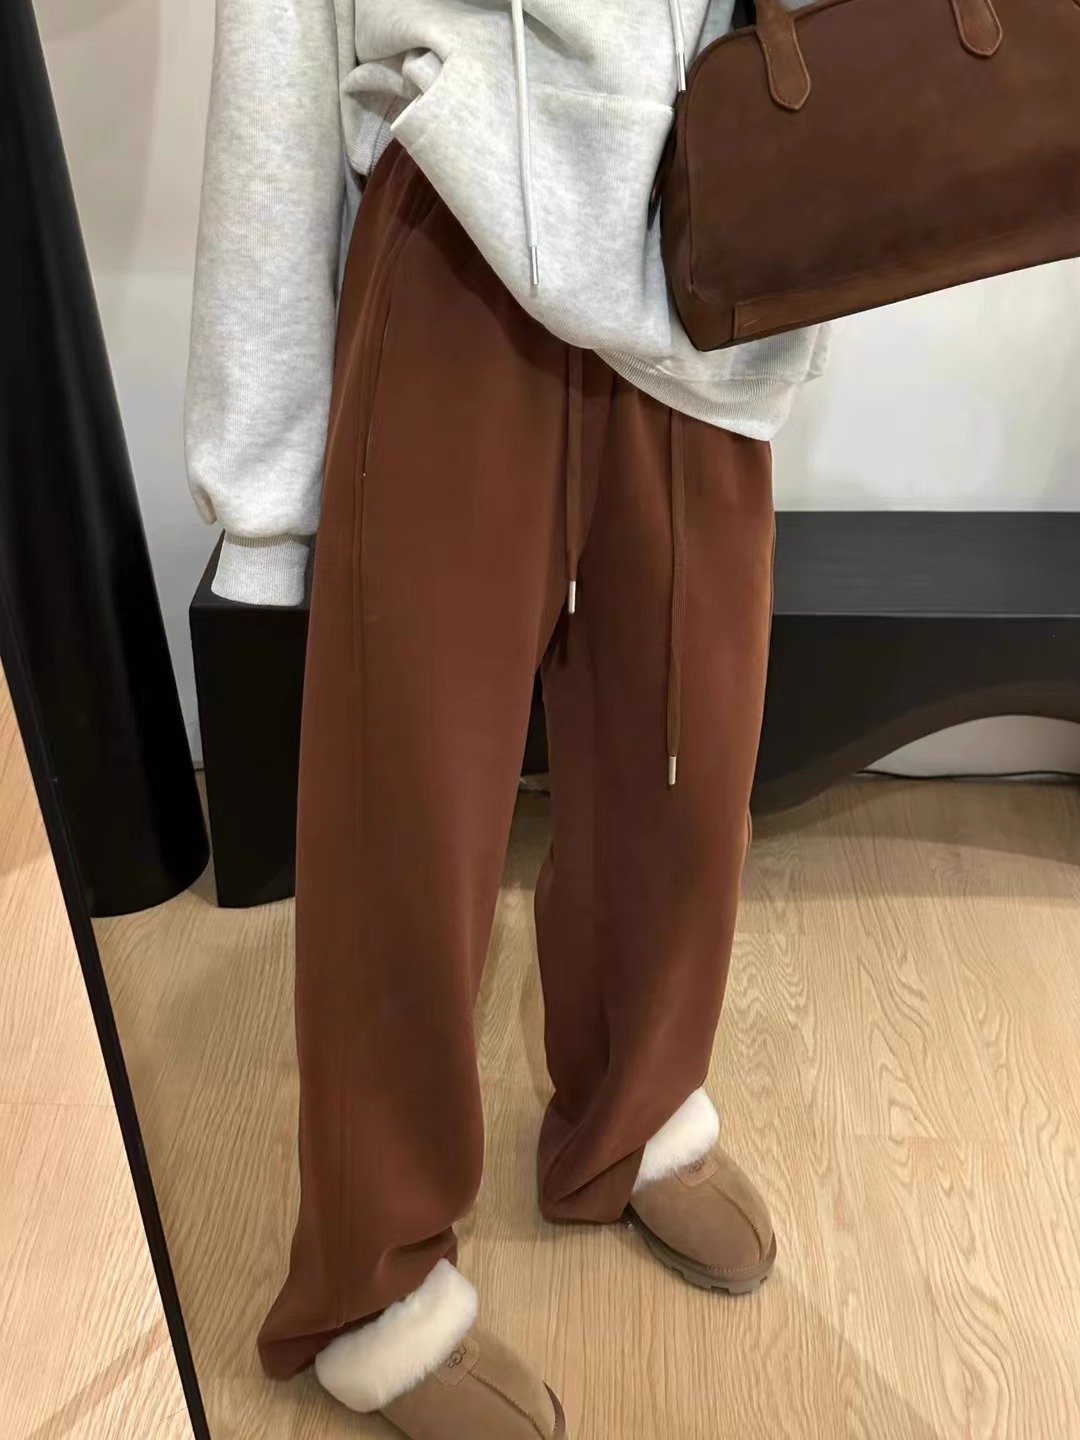 European high-waist drawstring sweatpants women's wide-legged winter new style plus velvet and thickened loose casual straight sports trousers